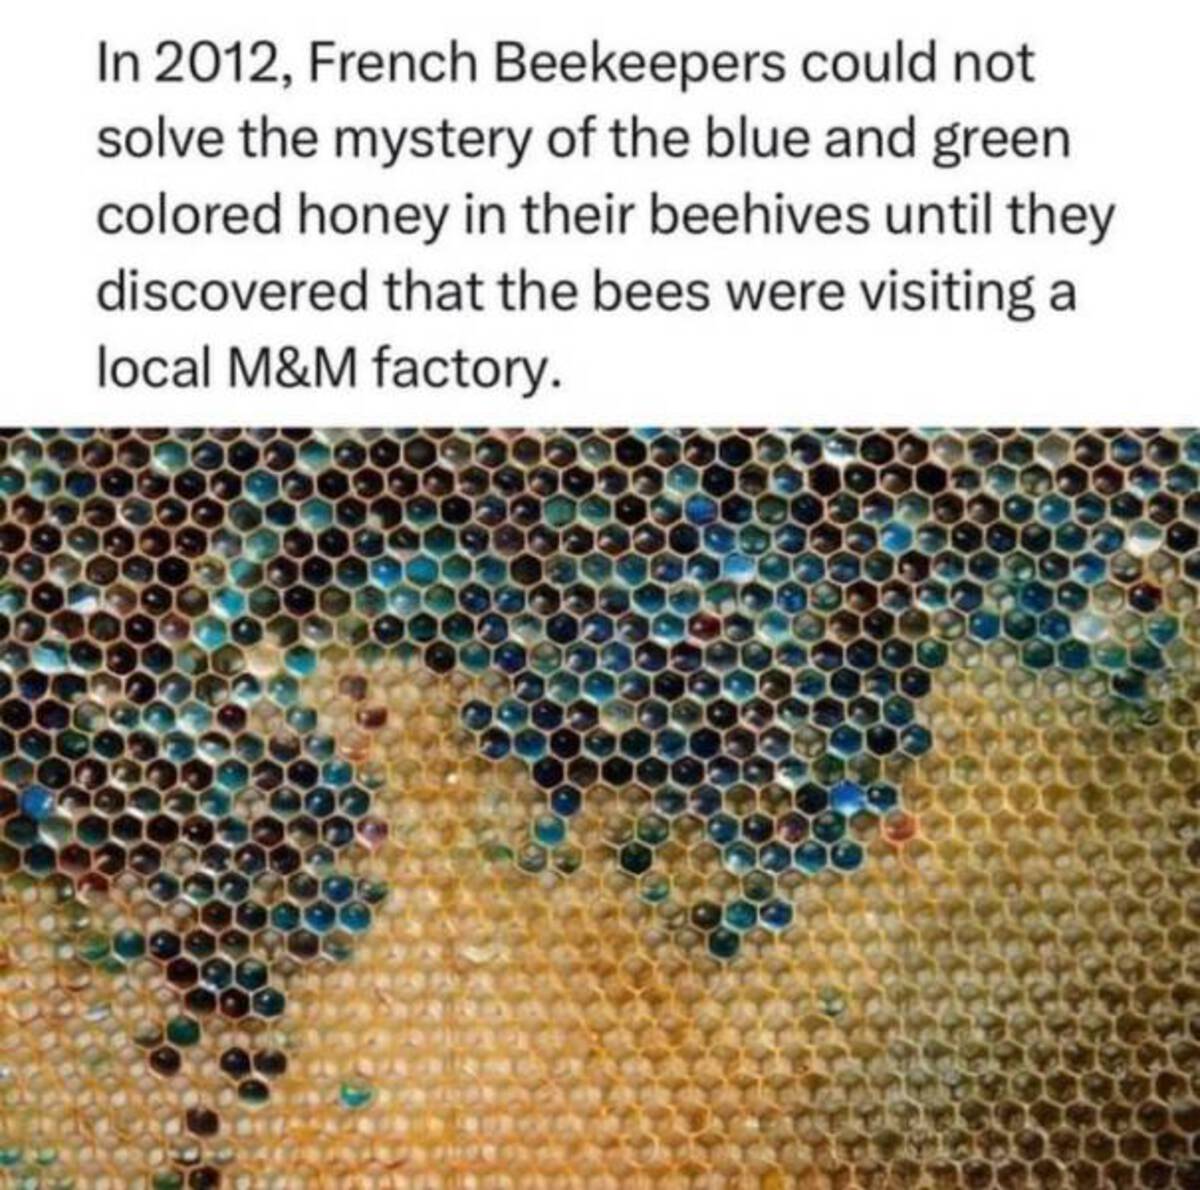 green honey bee - In 2012, French Beekeepers could not solve the mystery of the blue and green colored honey in their beehives until they discovered that the bees were visiting a local M&M factory.